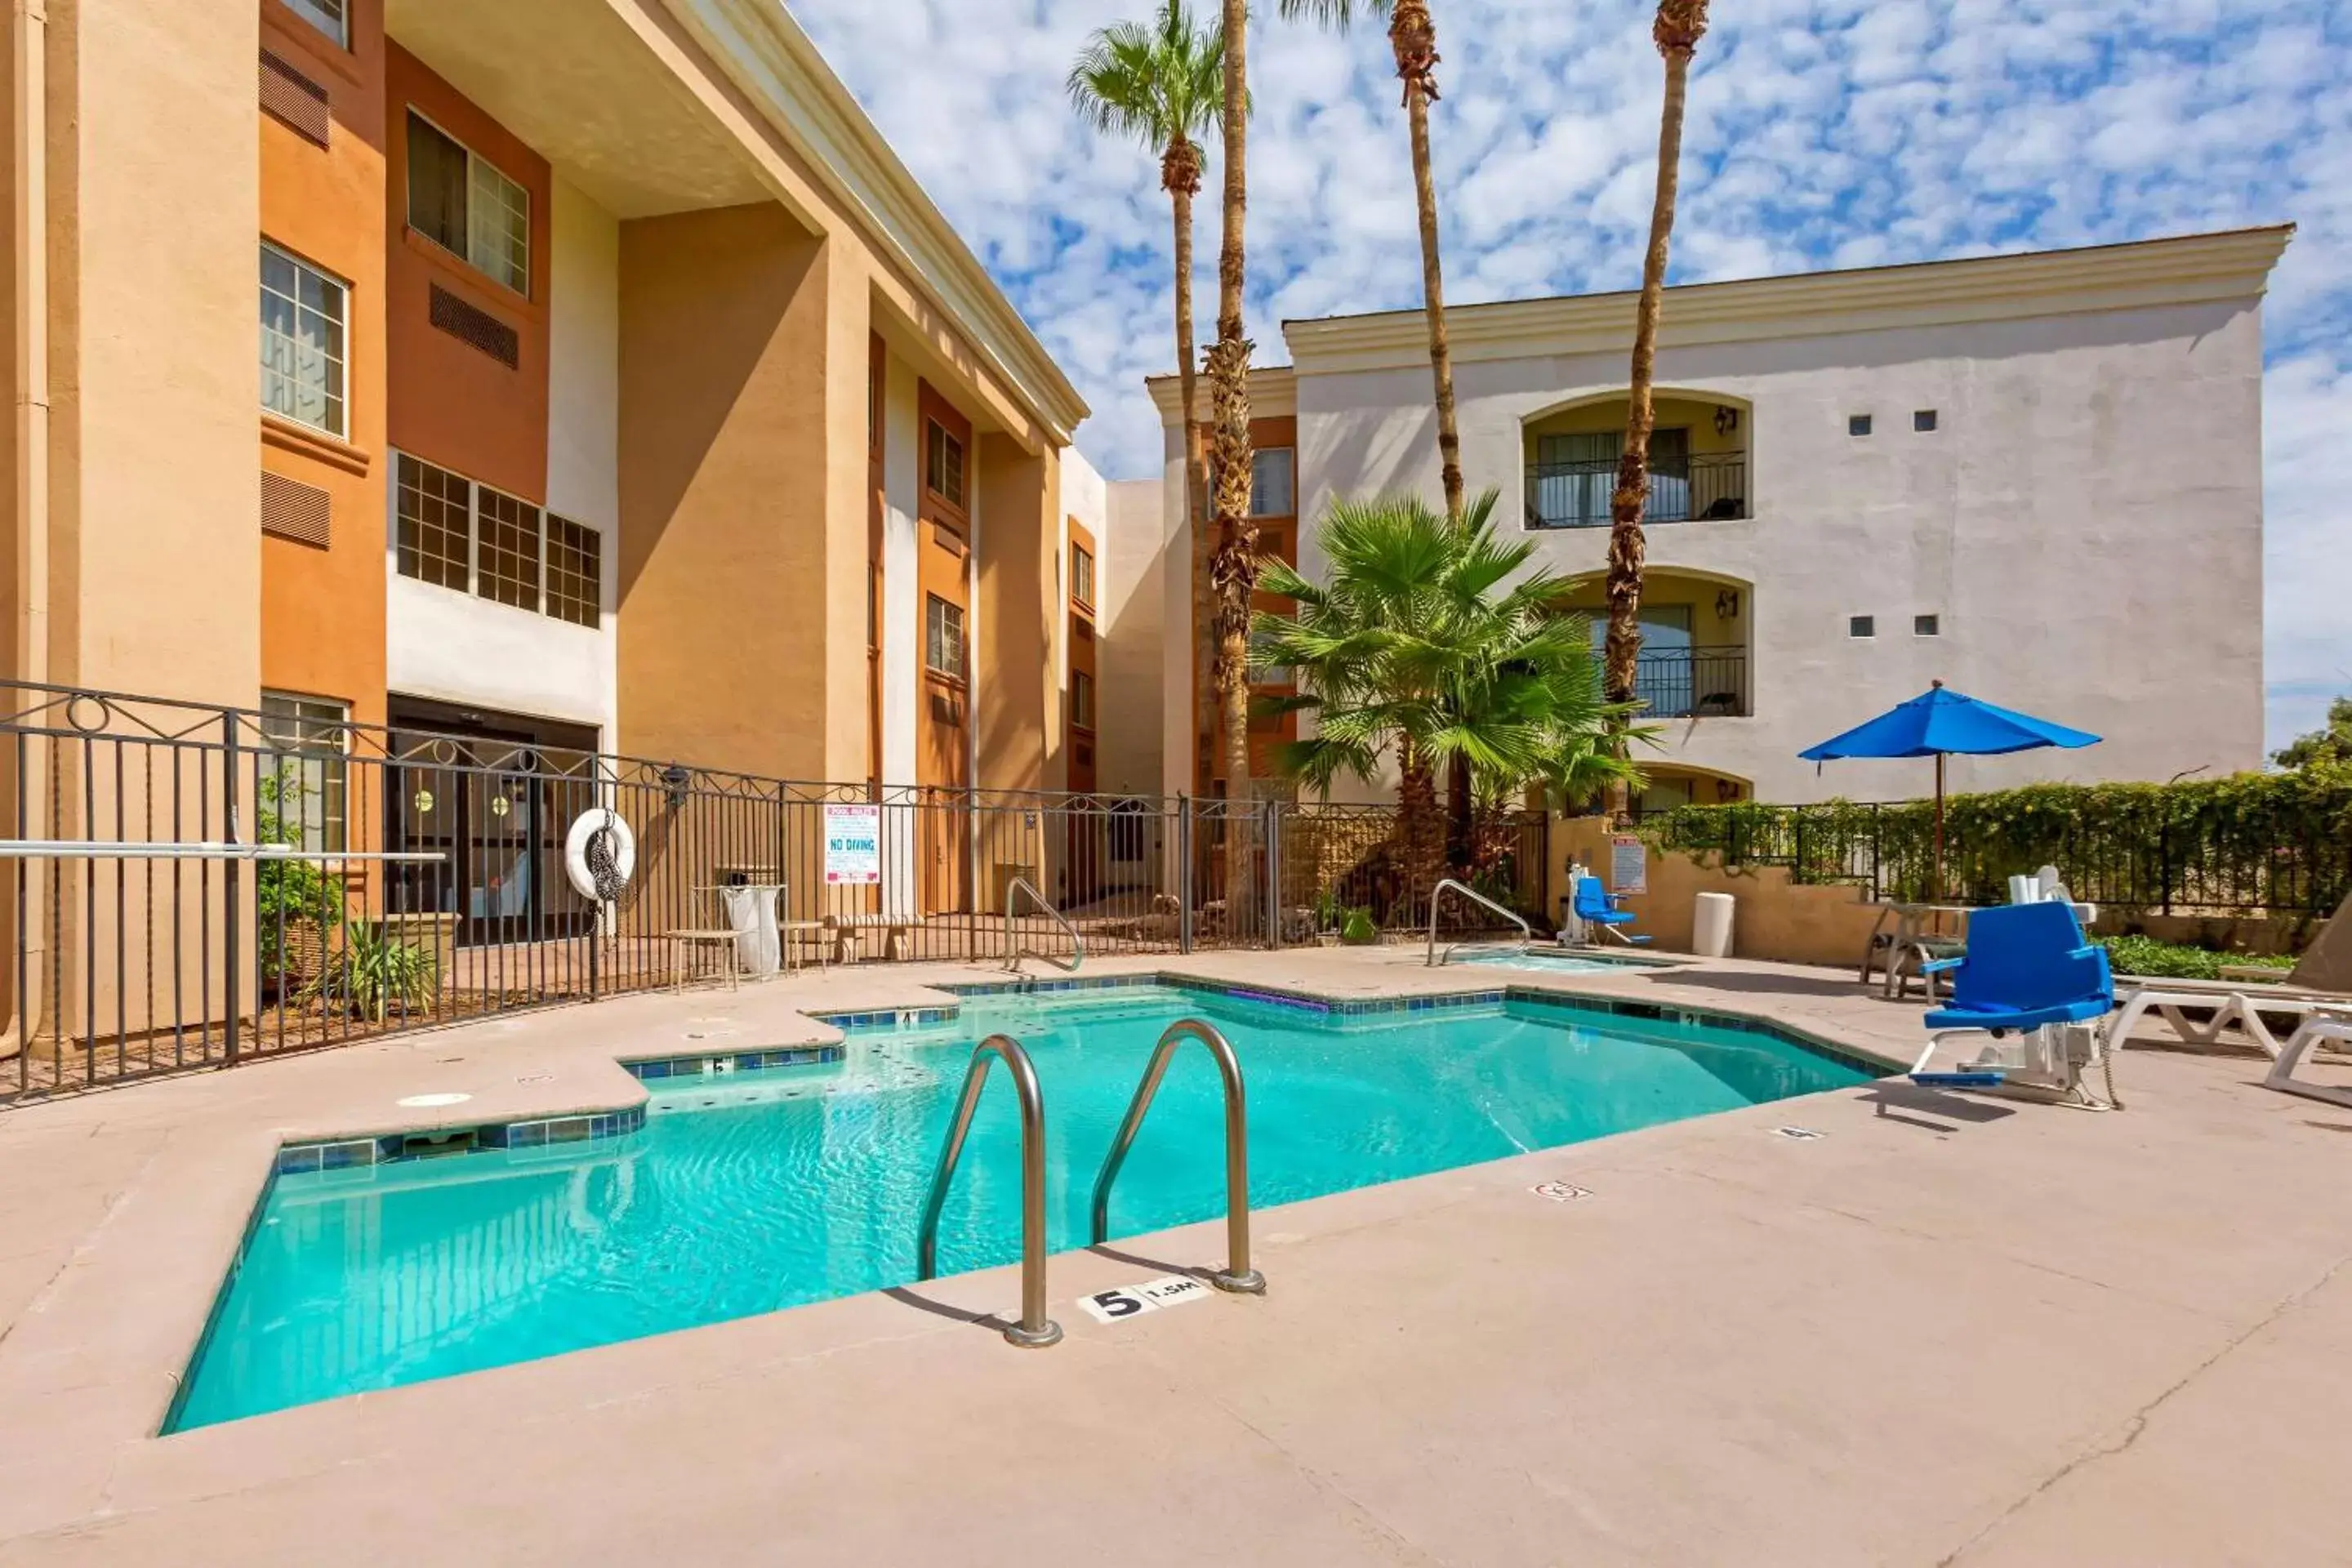 Swimming Pool in Comfort Inn & Suites North Glendale and Peoria